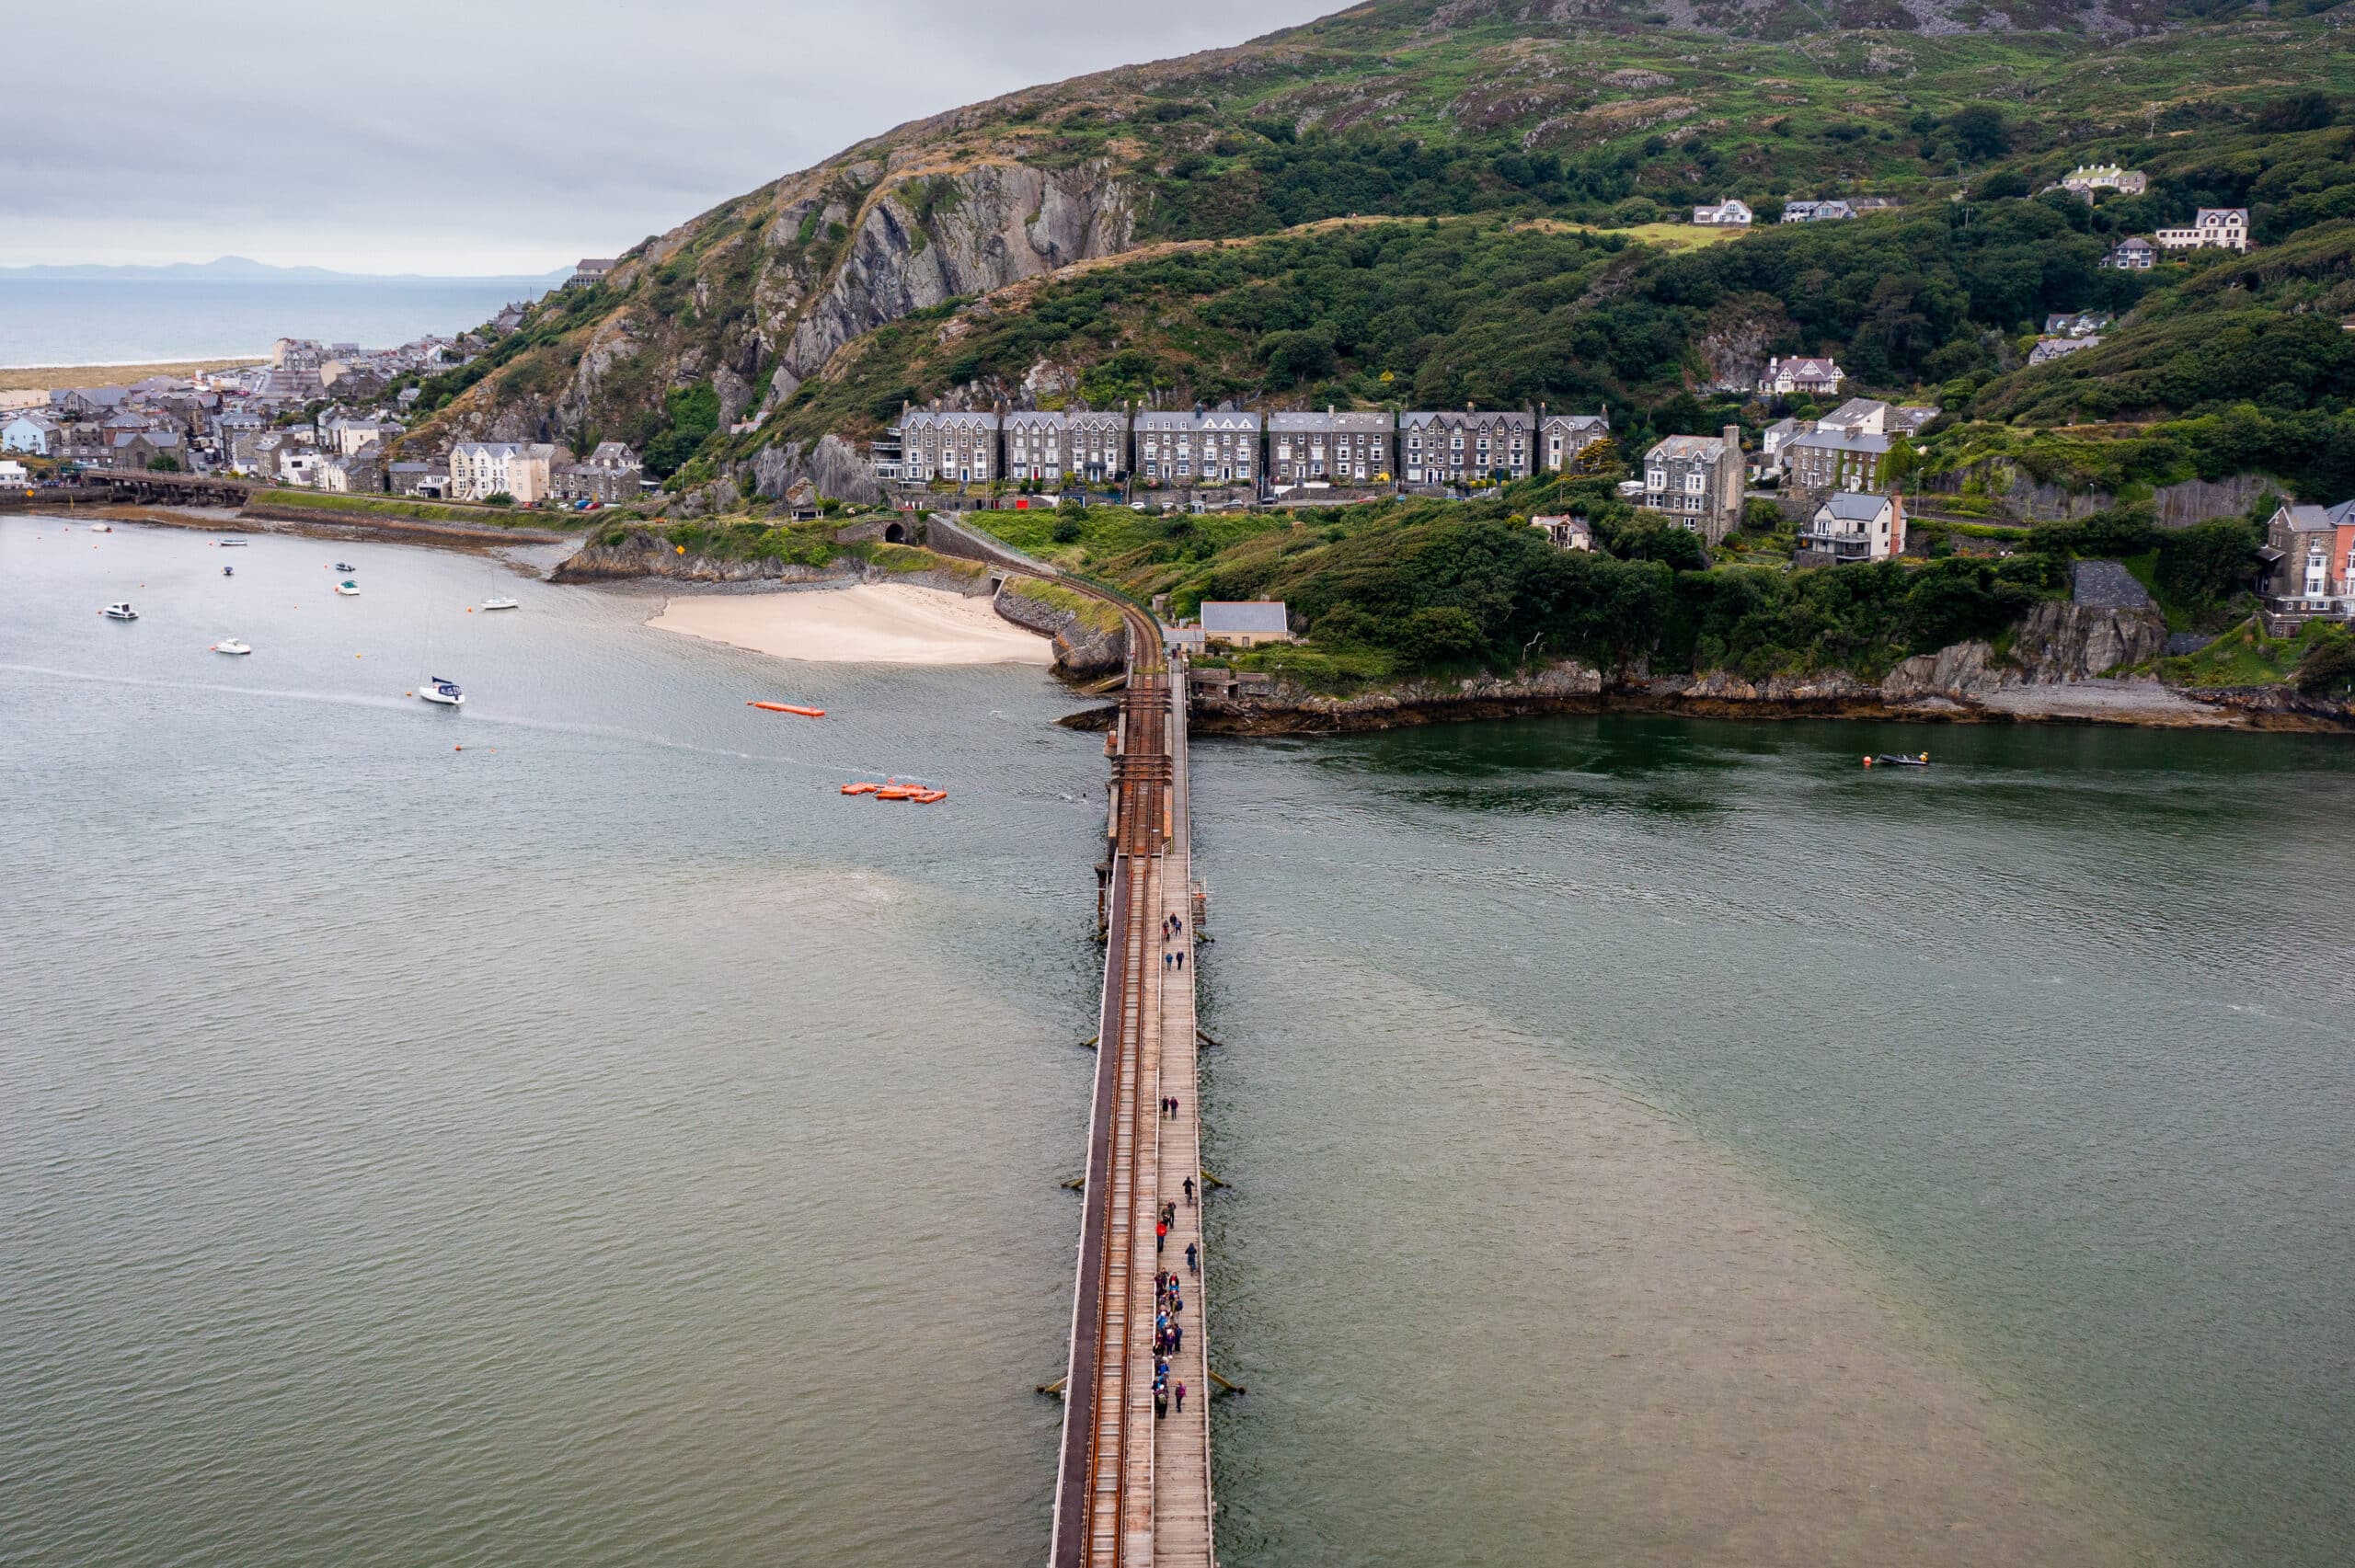 Road closures prompt changes to rail replacement service in Barmouth